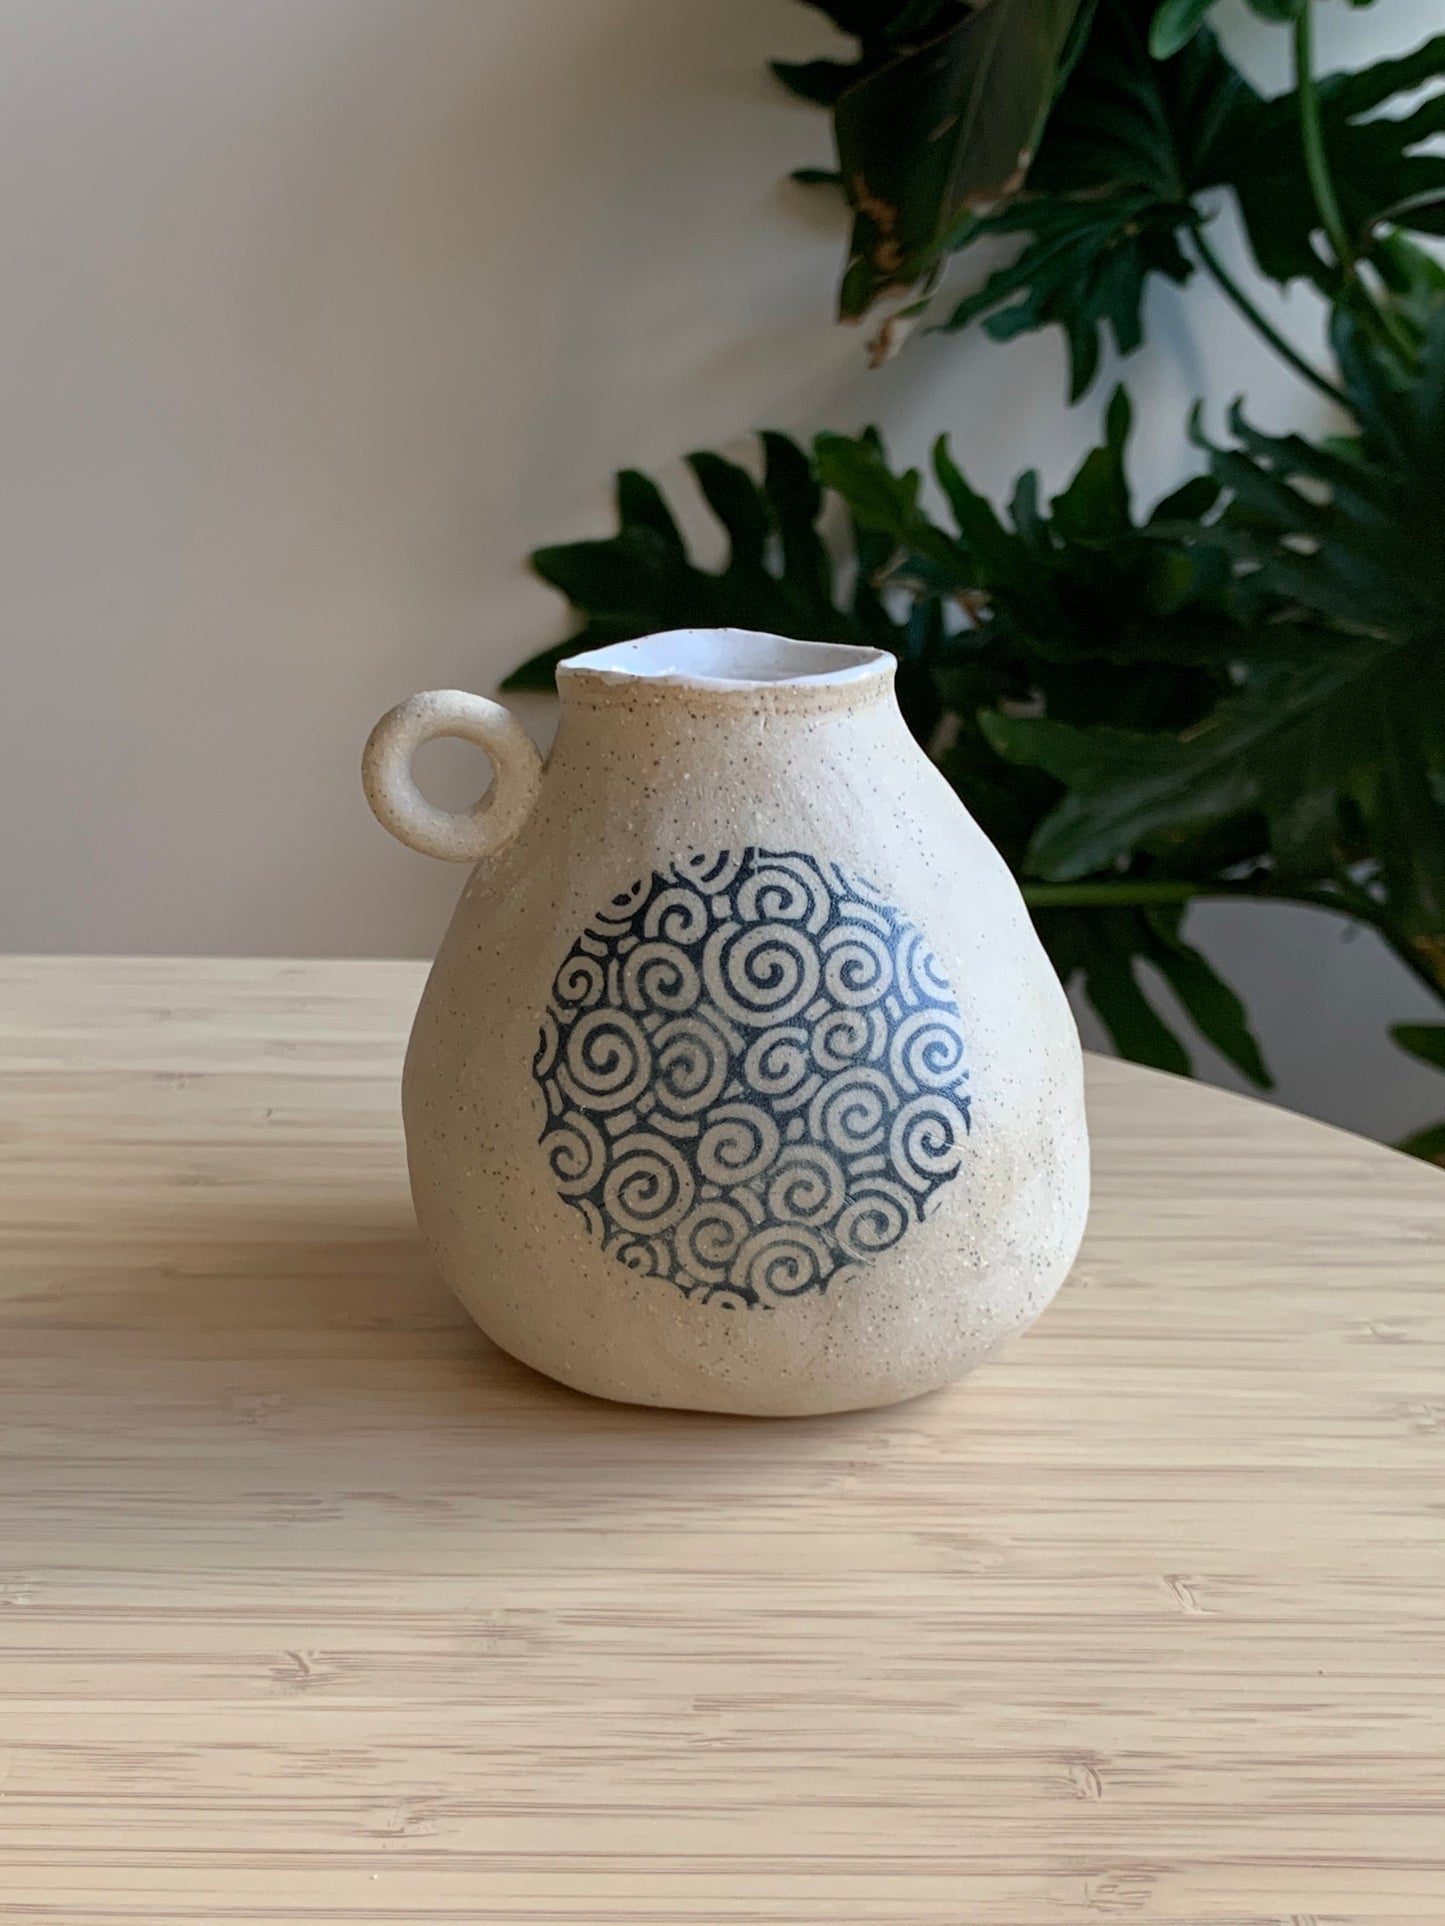 Make at home - clay kit and class - Vase